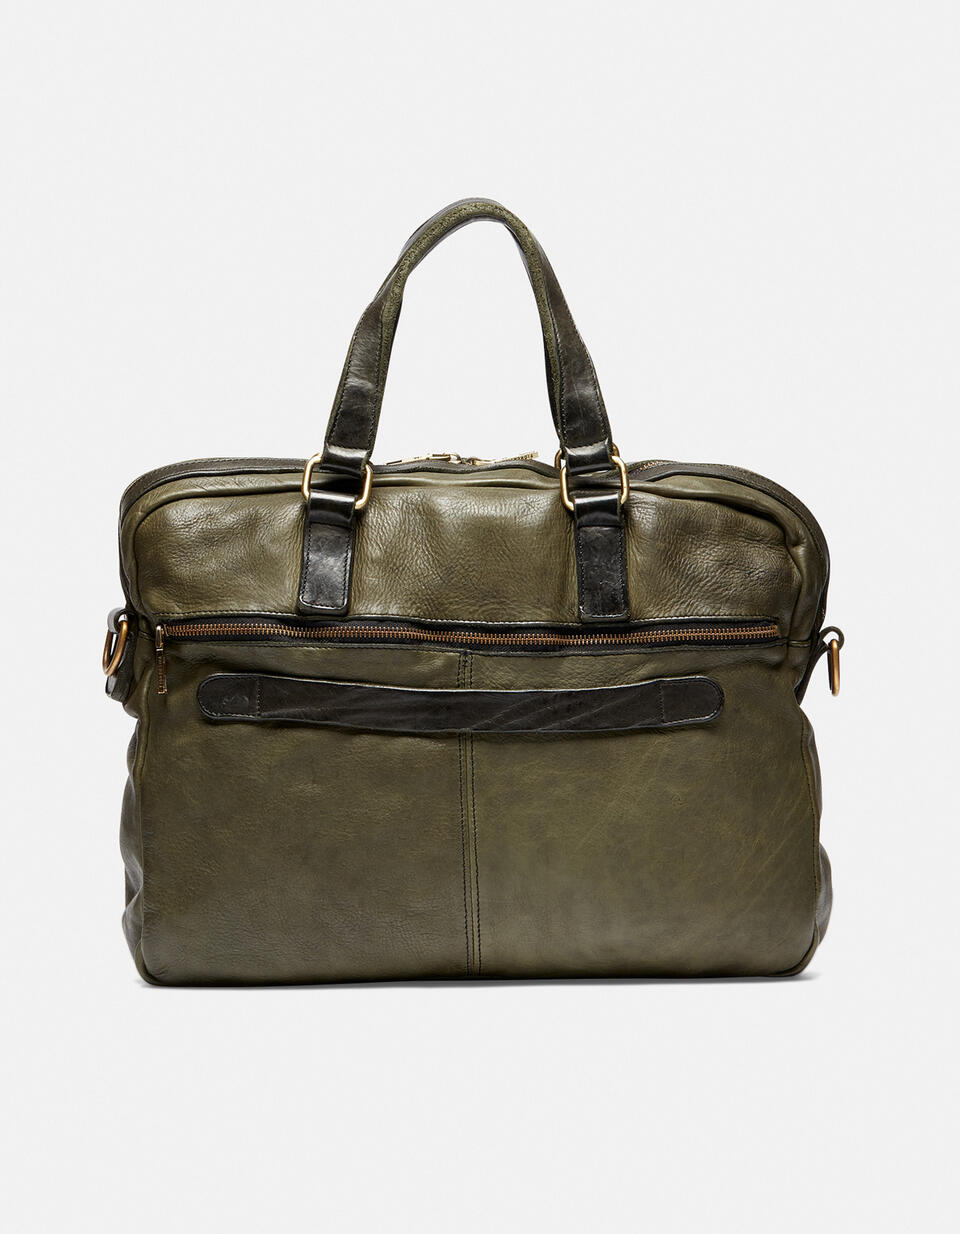 Millennial briefcase in natural leather - Briefcases and Laptop Bags | Briefcases FORESTA - Briefcases and Laptop Bags | BriefcasesCuoieria Fiorentina